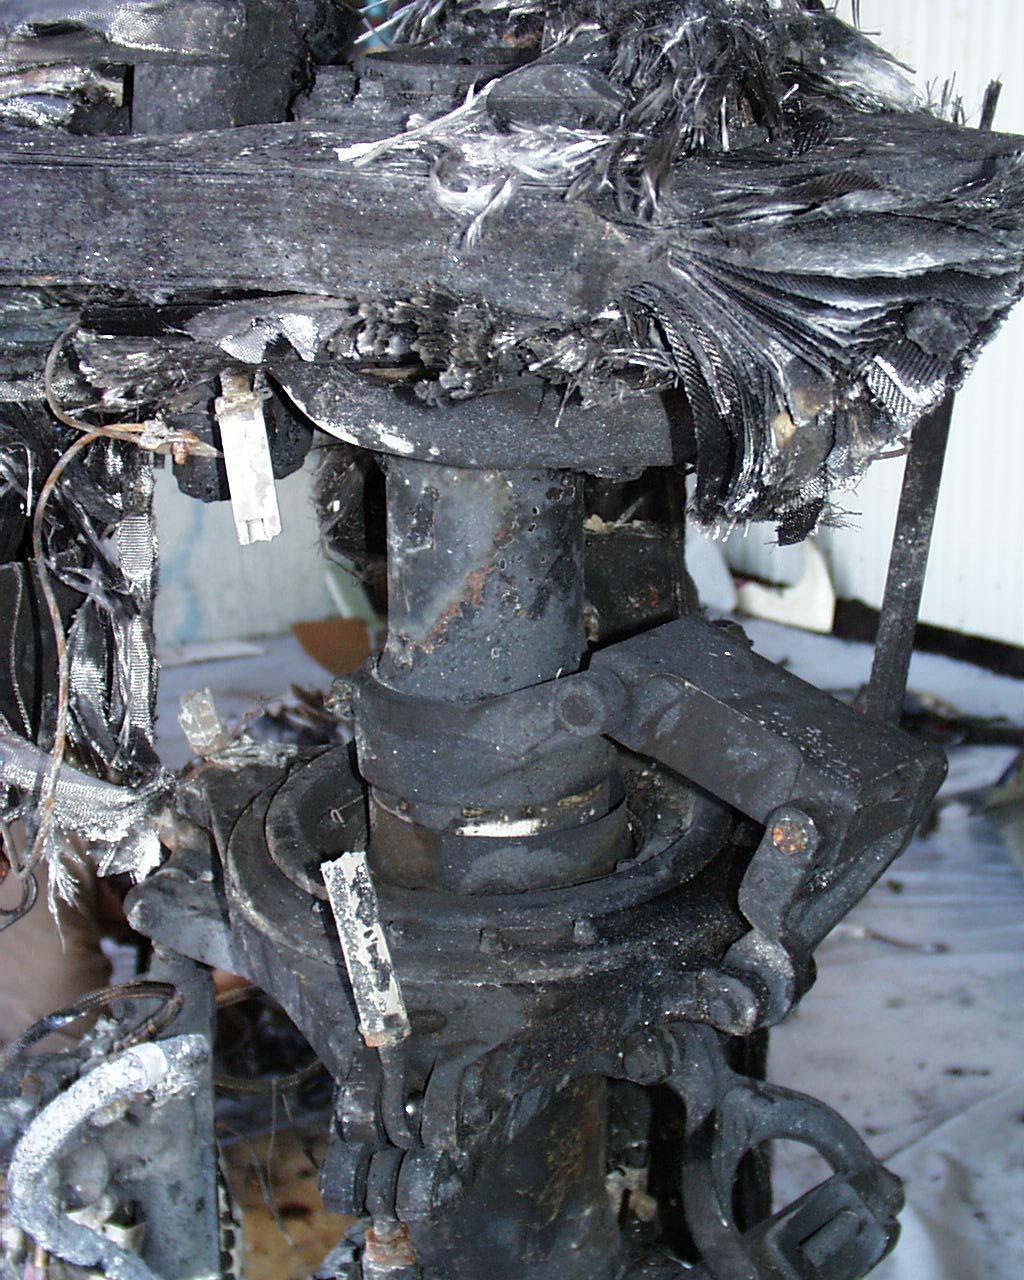 The main rotor pitch rods were broken and fire damaged and did not appear to be bent.